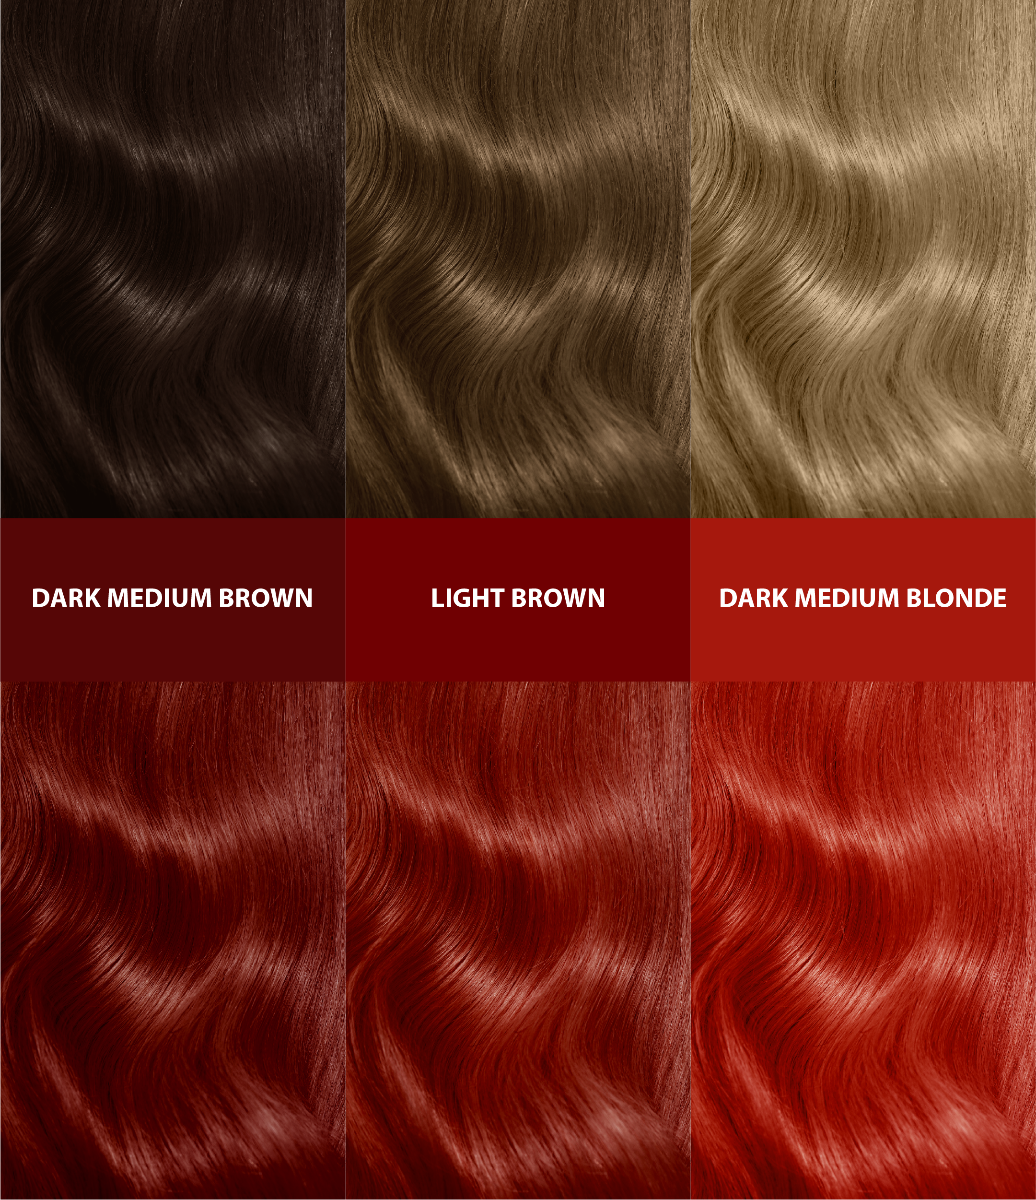 Splat Red Permanent Hair Dye Kit Iconic Red Double Lift